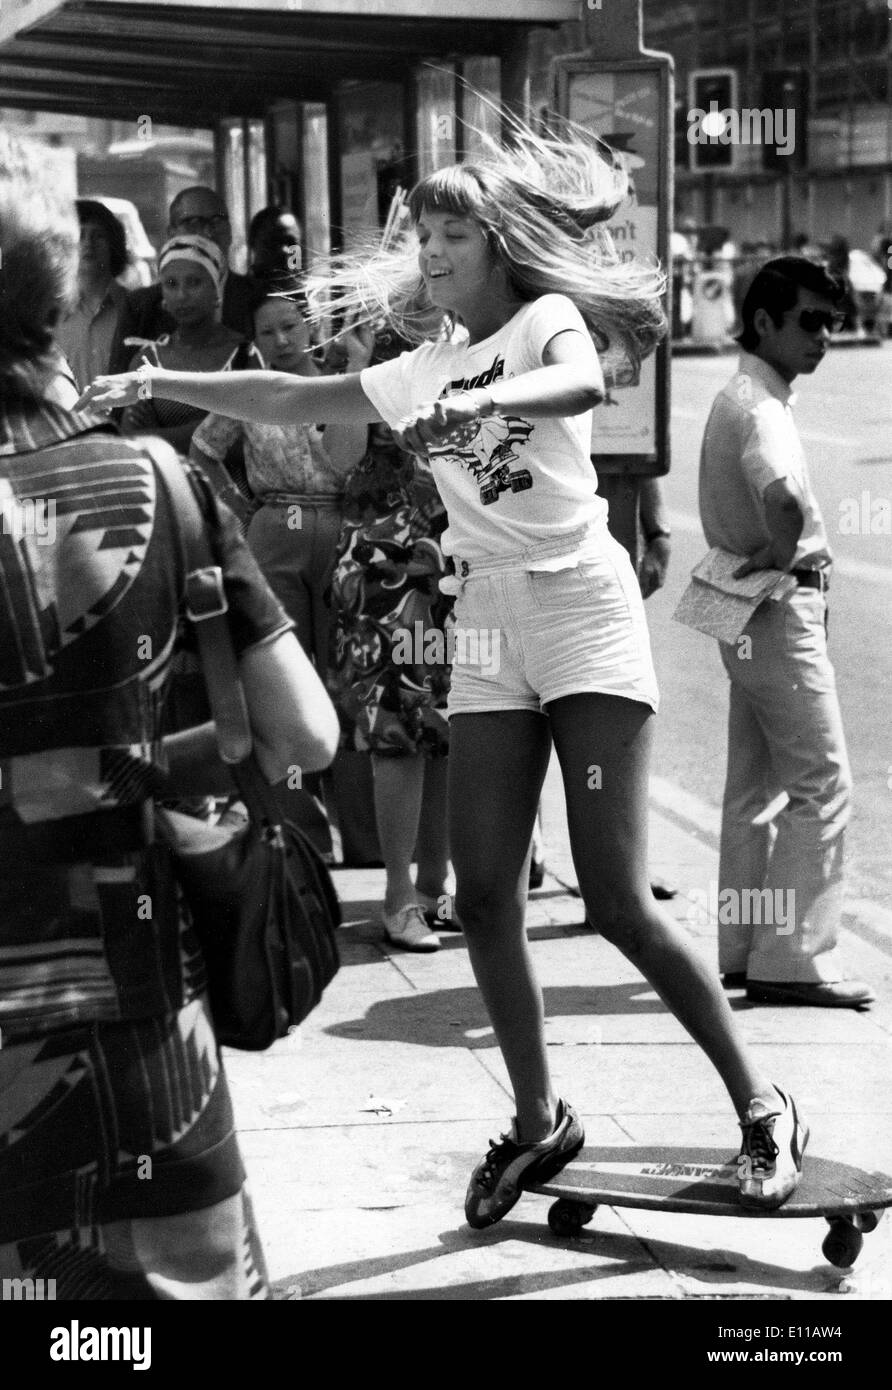 Jul 02, 1976; Kensington, UK; MISS ROBIN ALAWAI, the world free-style skateboard champion demonstrates her skills with one of Britain's new launch of their Skuda Skateboard.. (Credit Image: KEYSTONE Pictures USA/ZUMAPRESS.com) Stock Photo